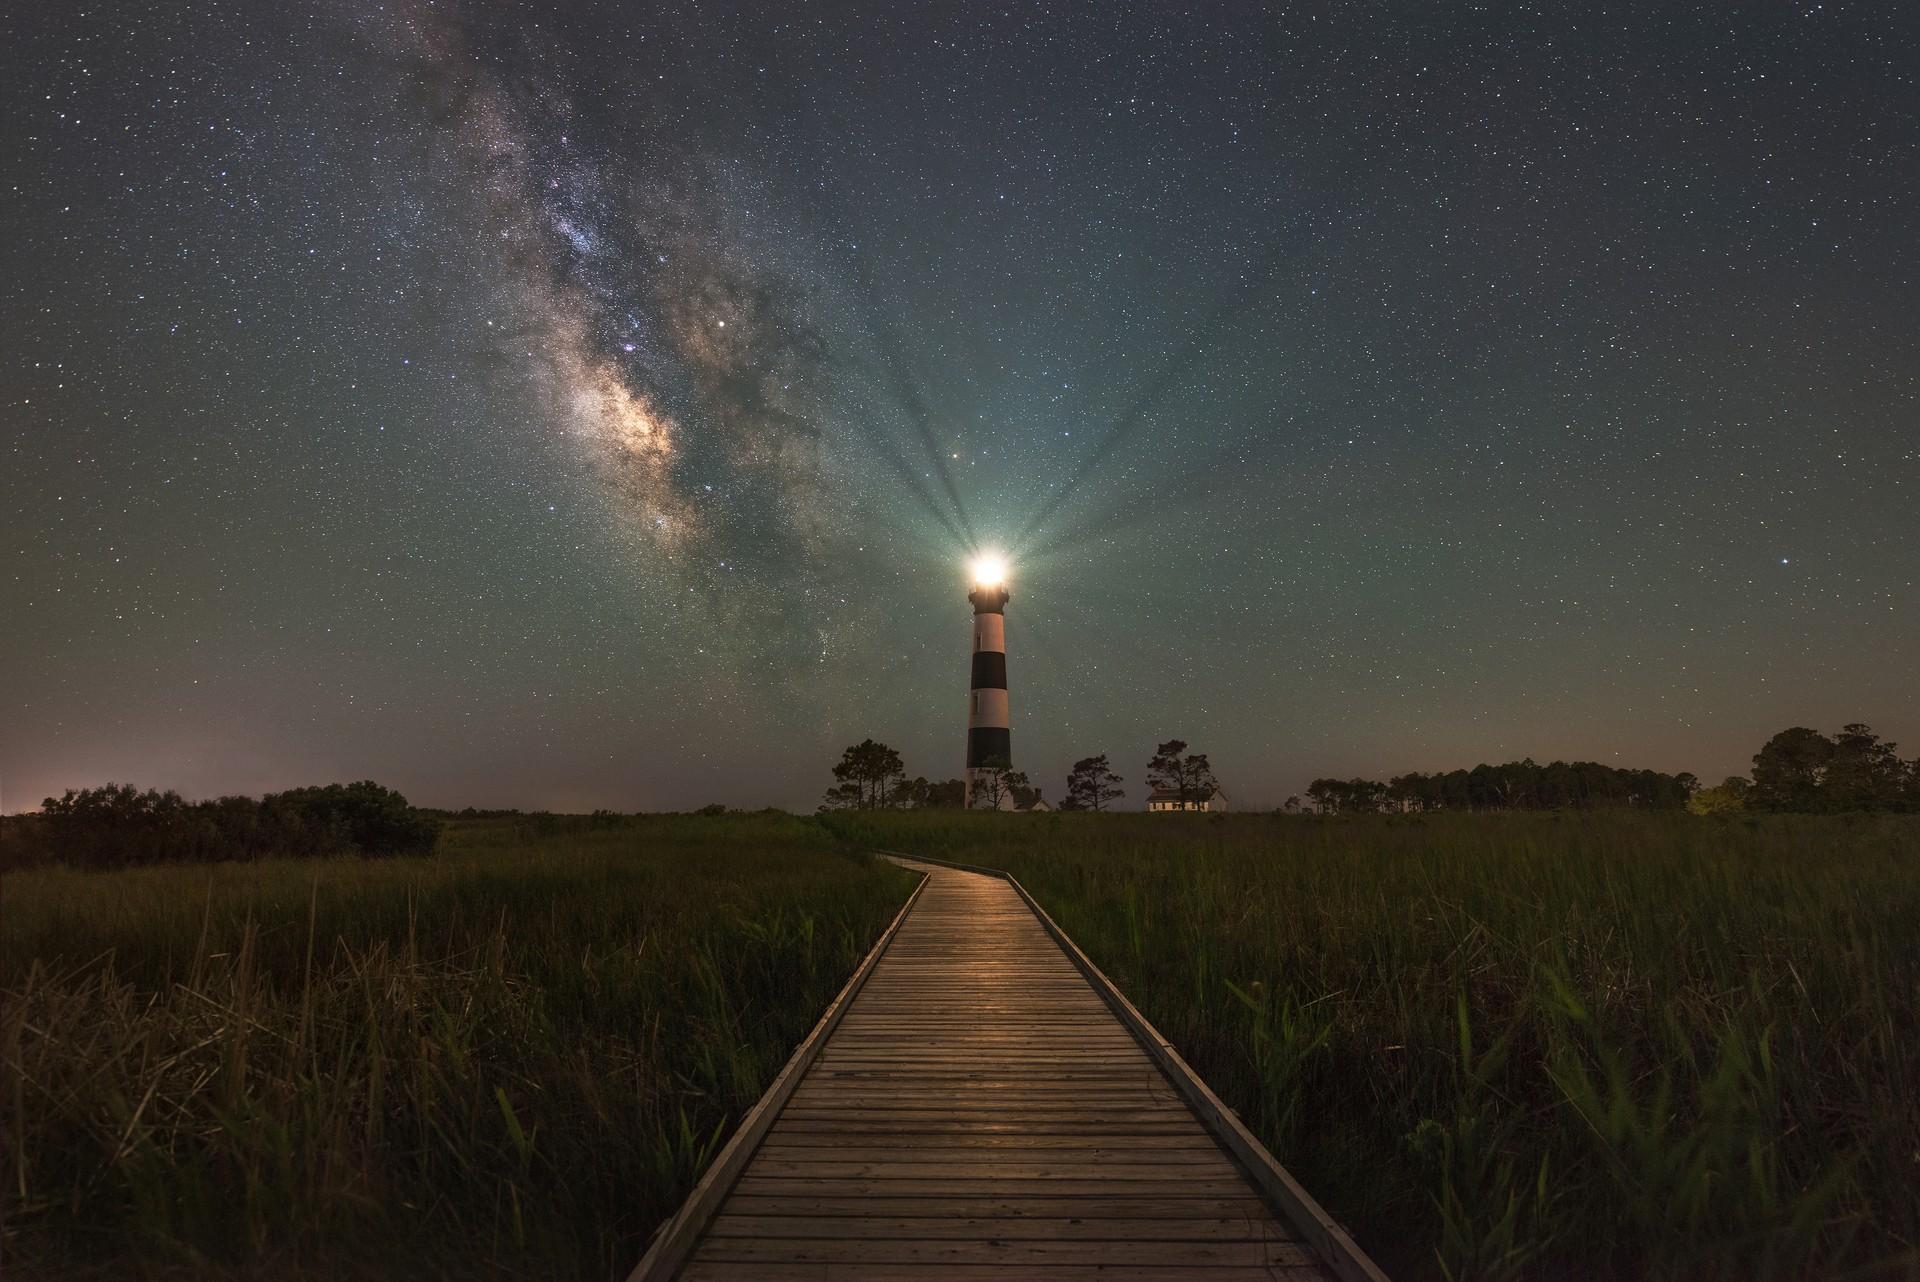 Architecture in Hatteras Island in the night